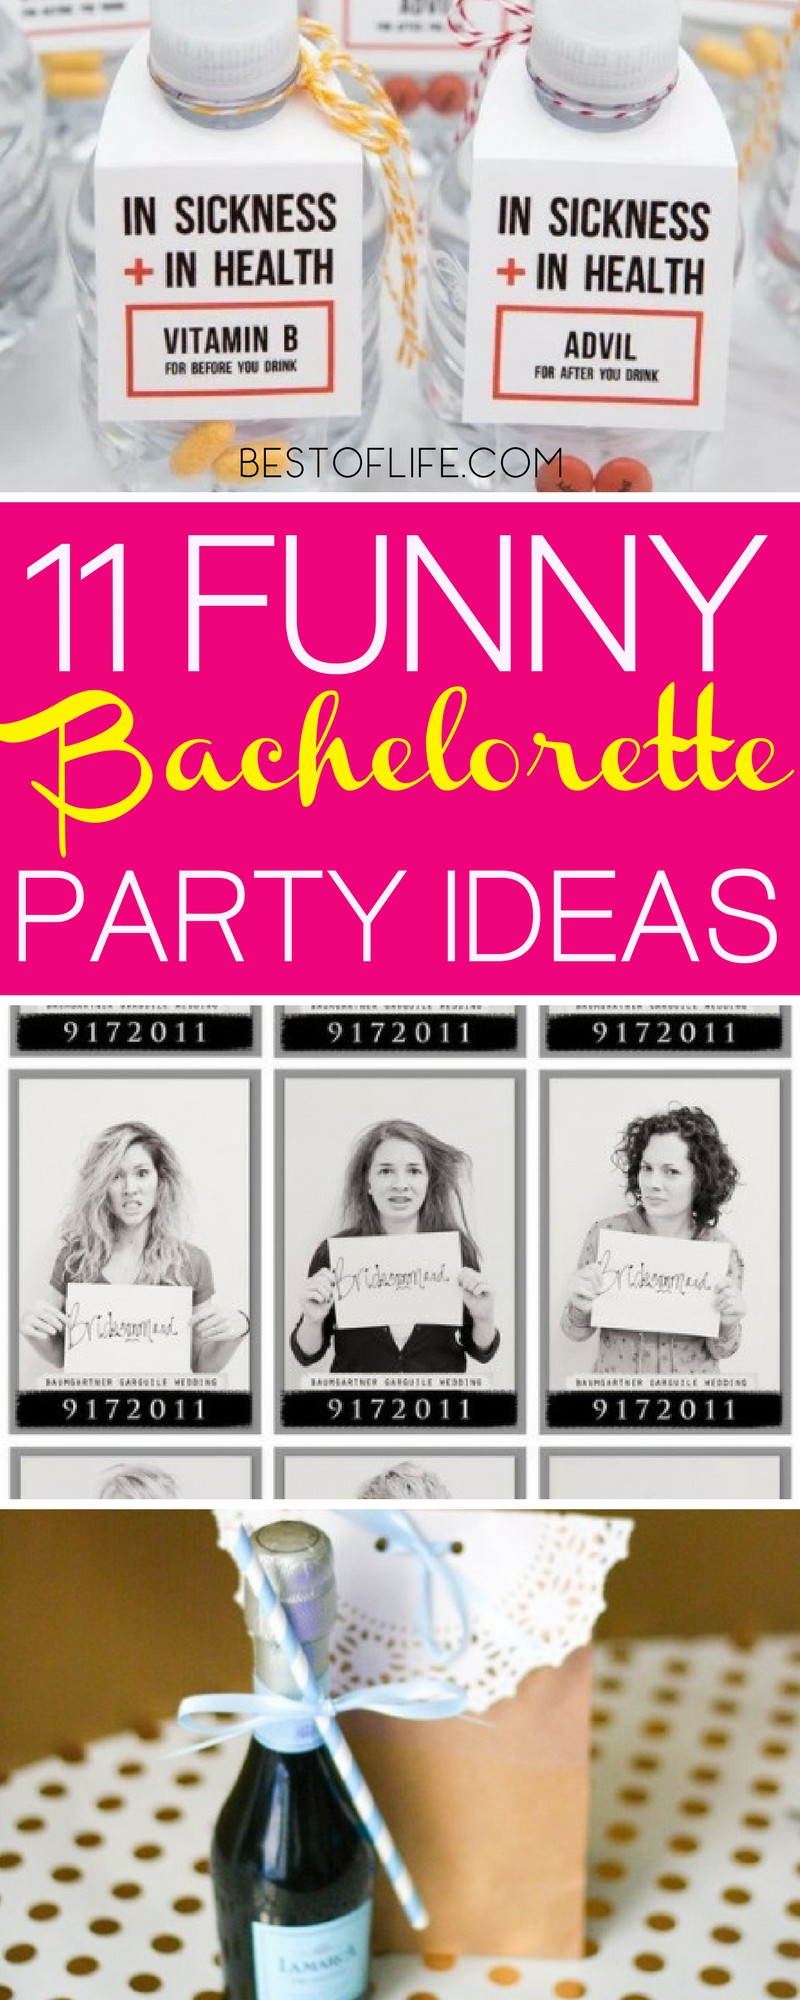 Cute Bachelorette Party Ideas
 11 Funny Bachelorette Party Ideas and Games The Best of Life